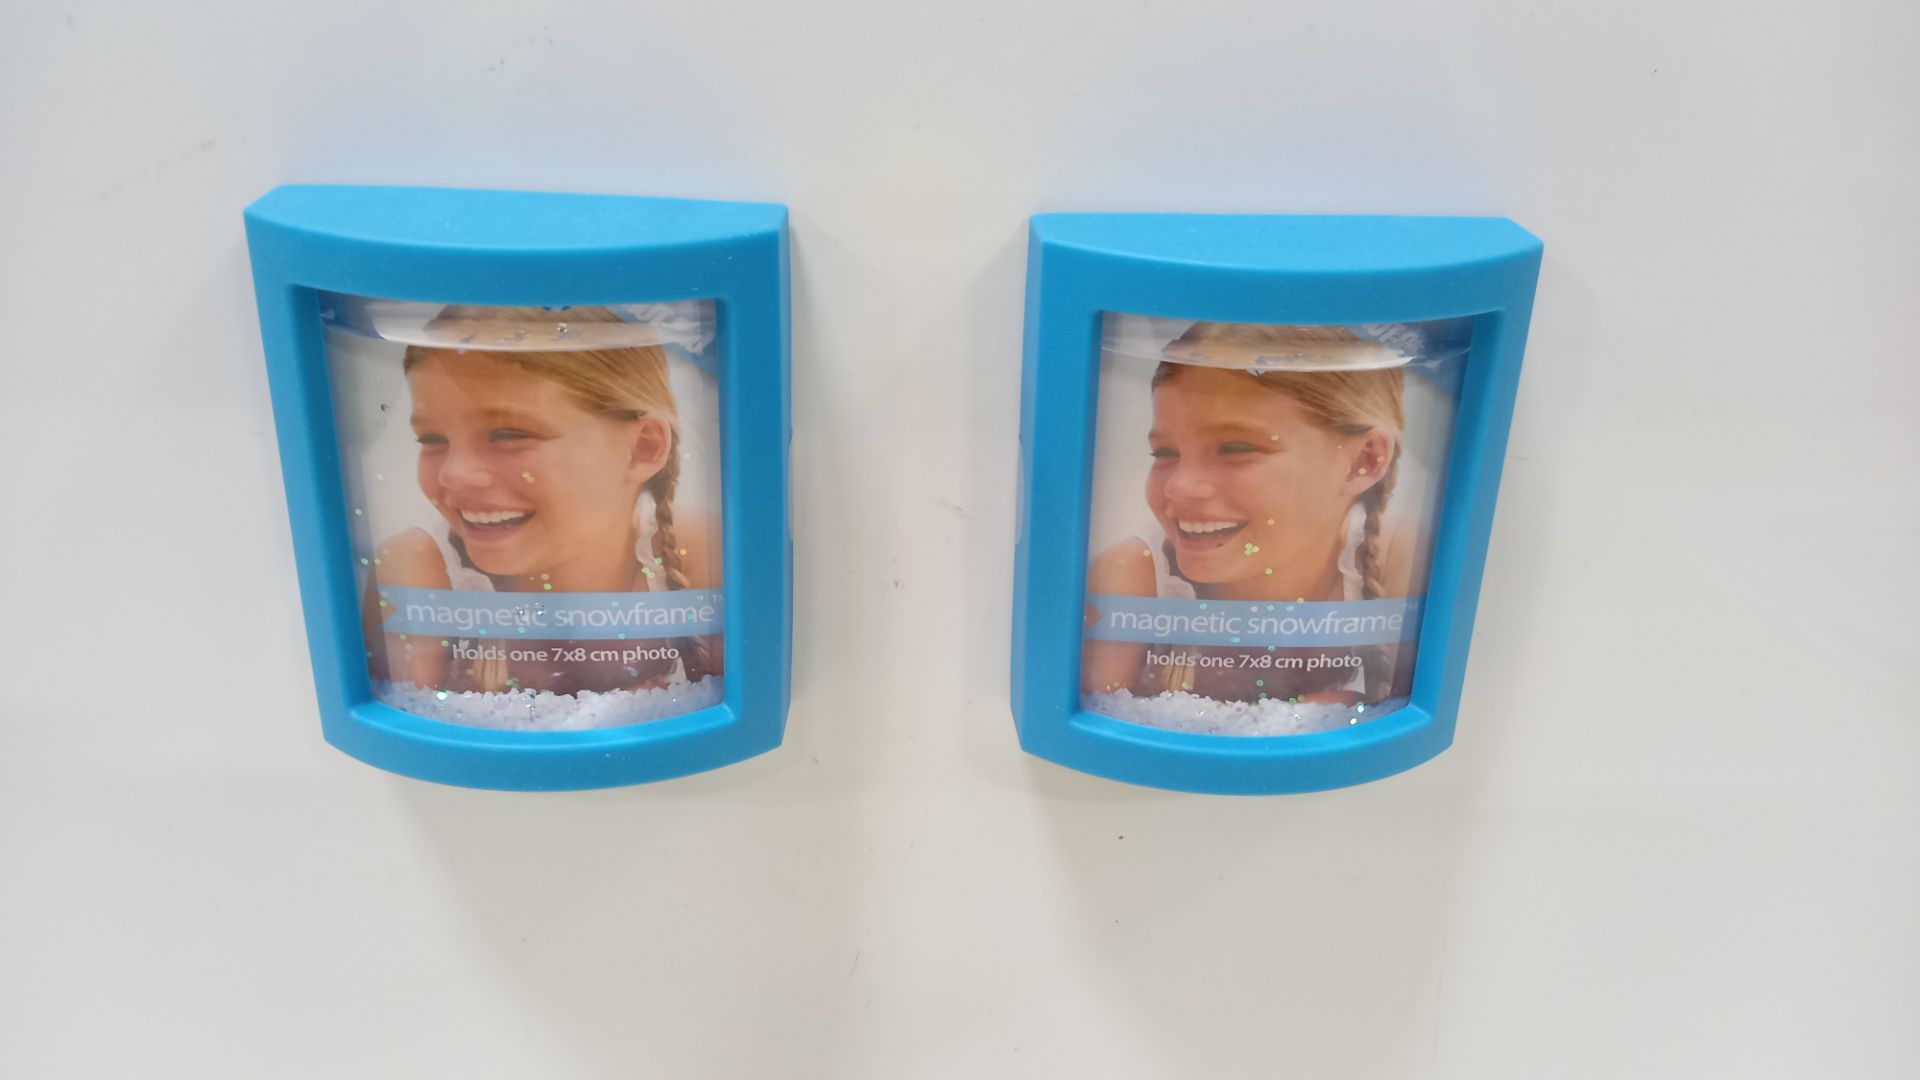 1152 X BRAND NEW SHOT2GO MAGNETIC SNOWFRAME HOLD ONE 7X8 CM PHOTO COMES IN BLUE CASE ( IN 12 BOXES)